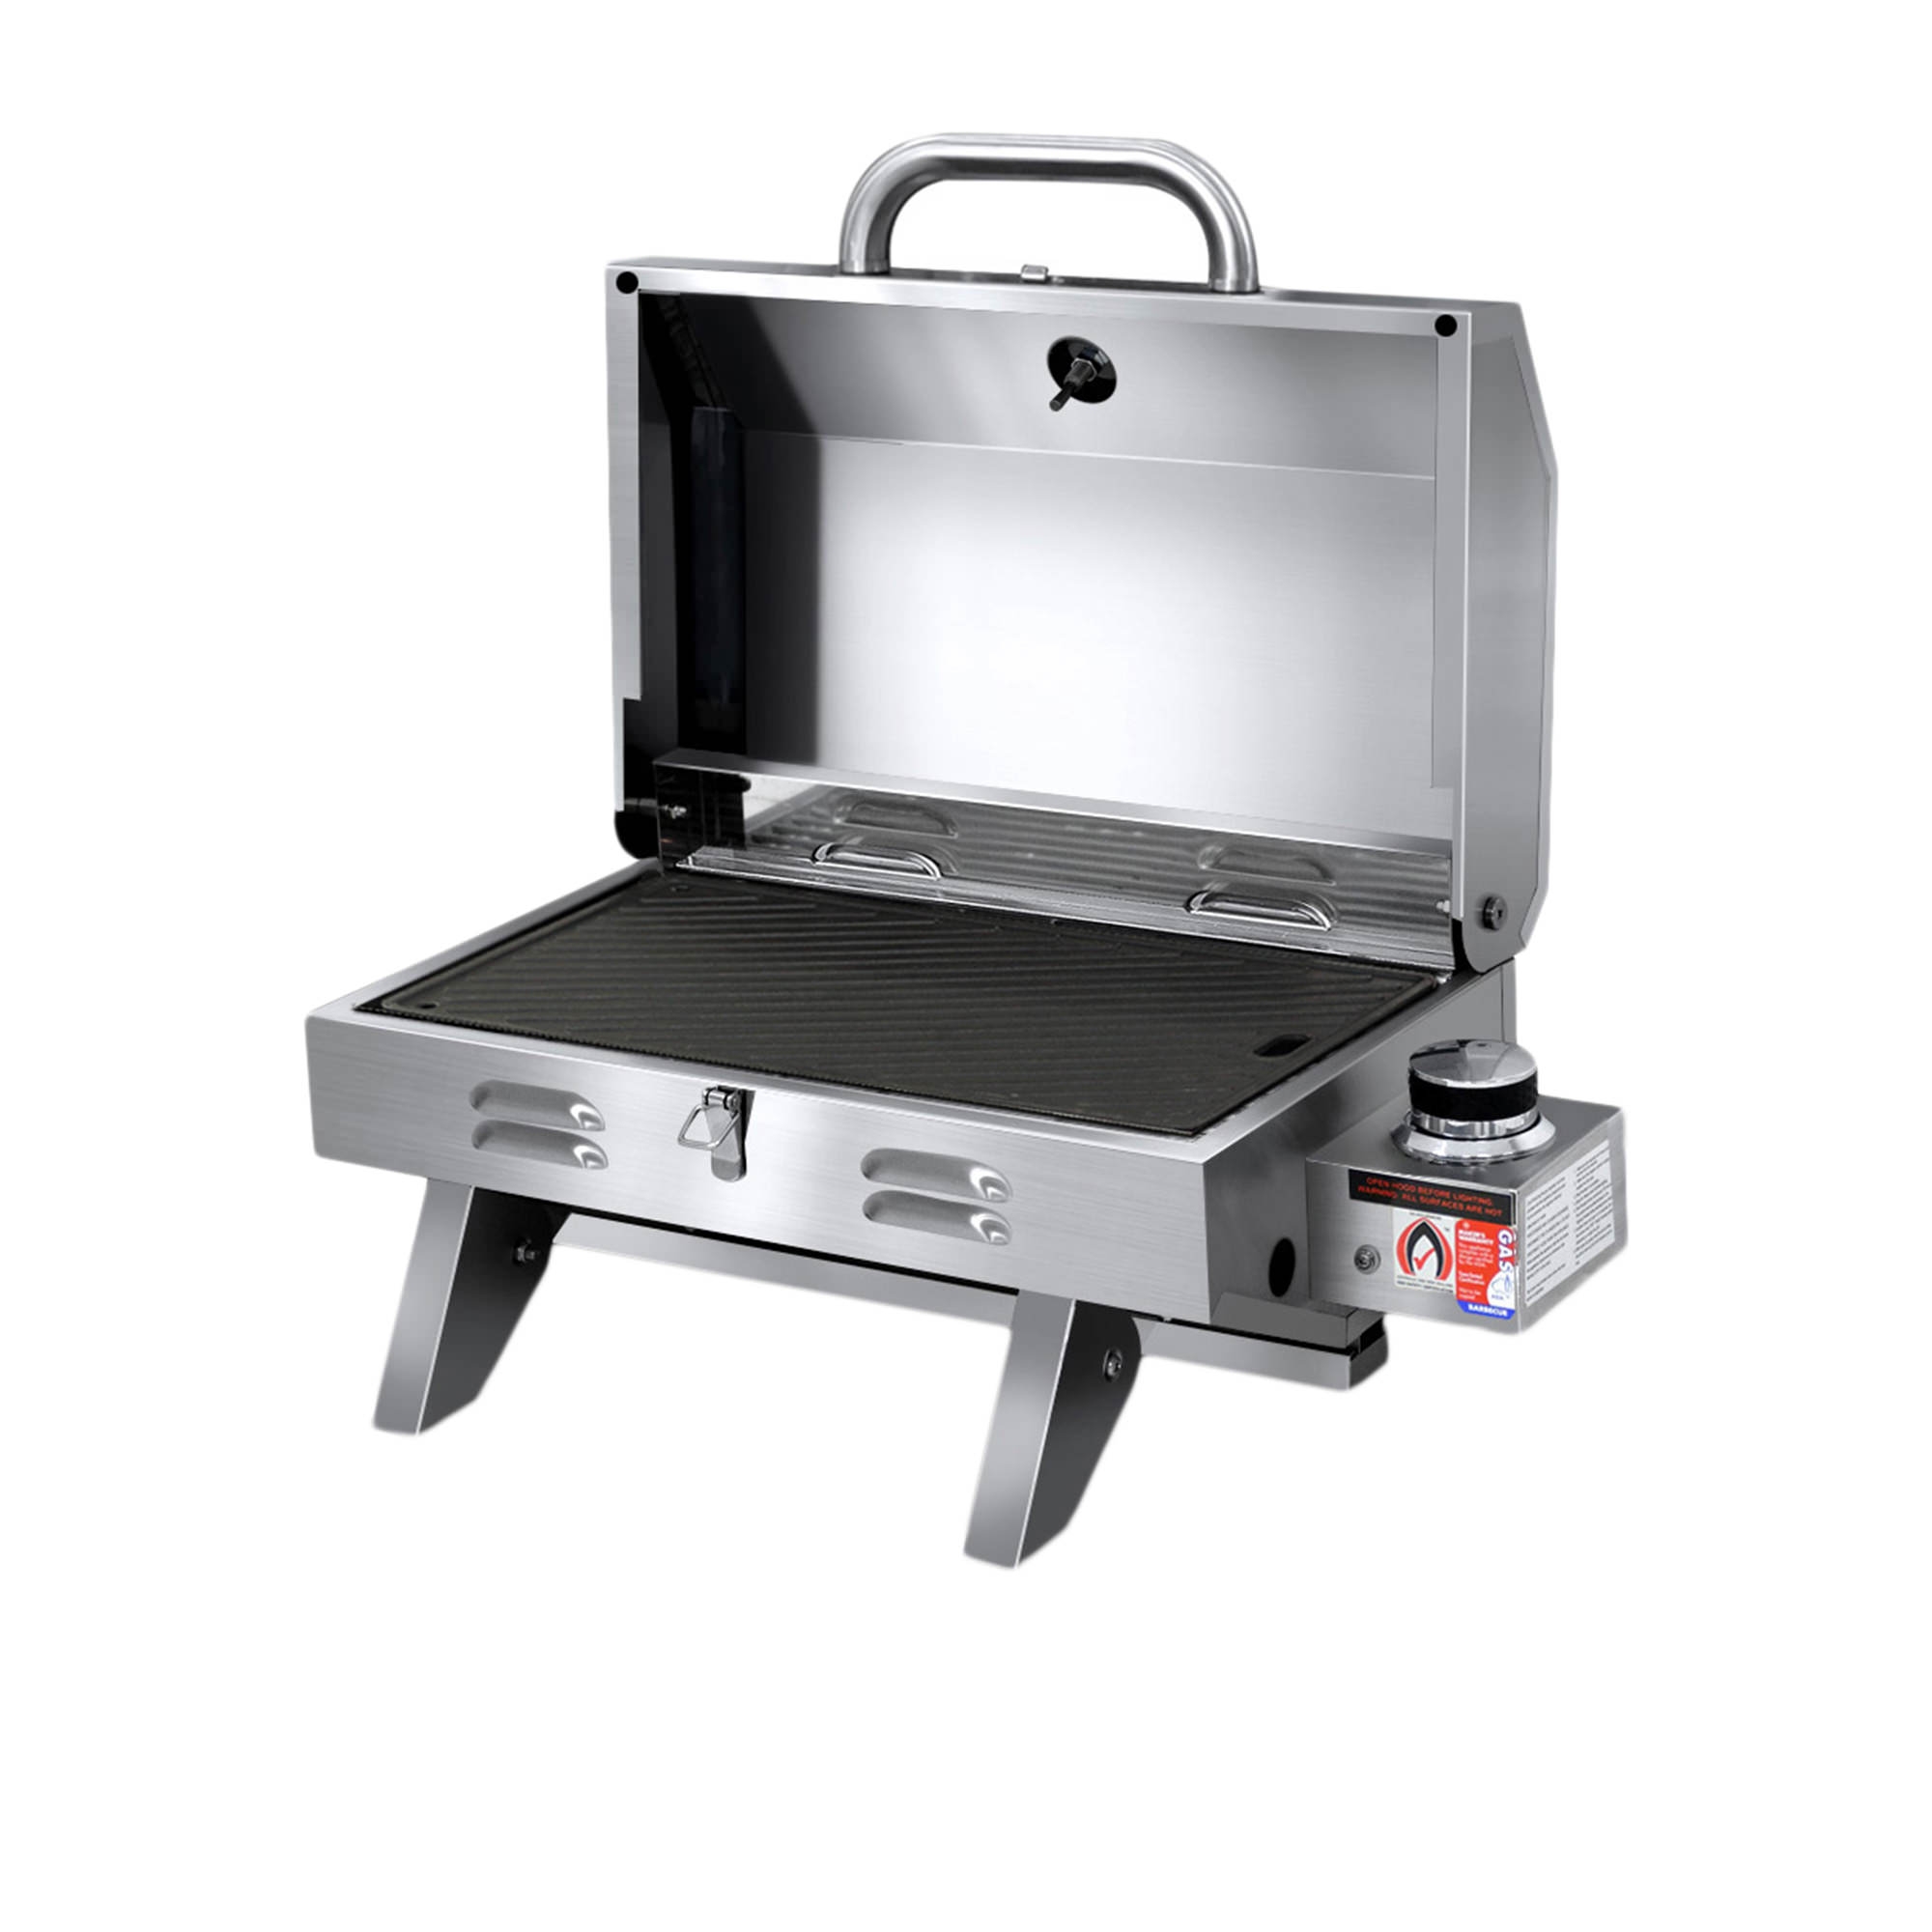 Grillz Gas Camping BBQ with Double Sided Grill Plate 60cm Image 1